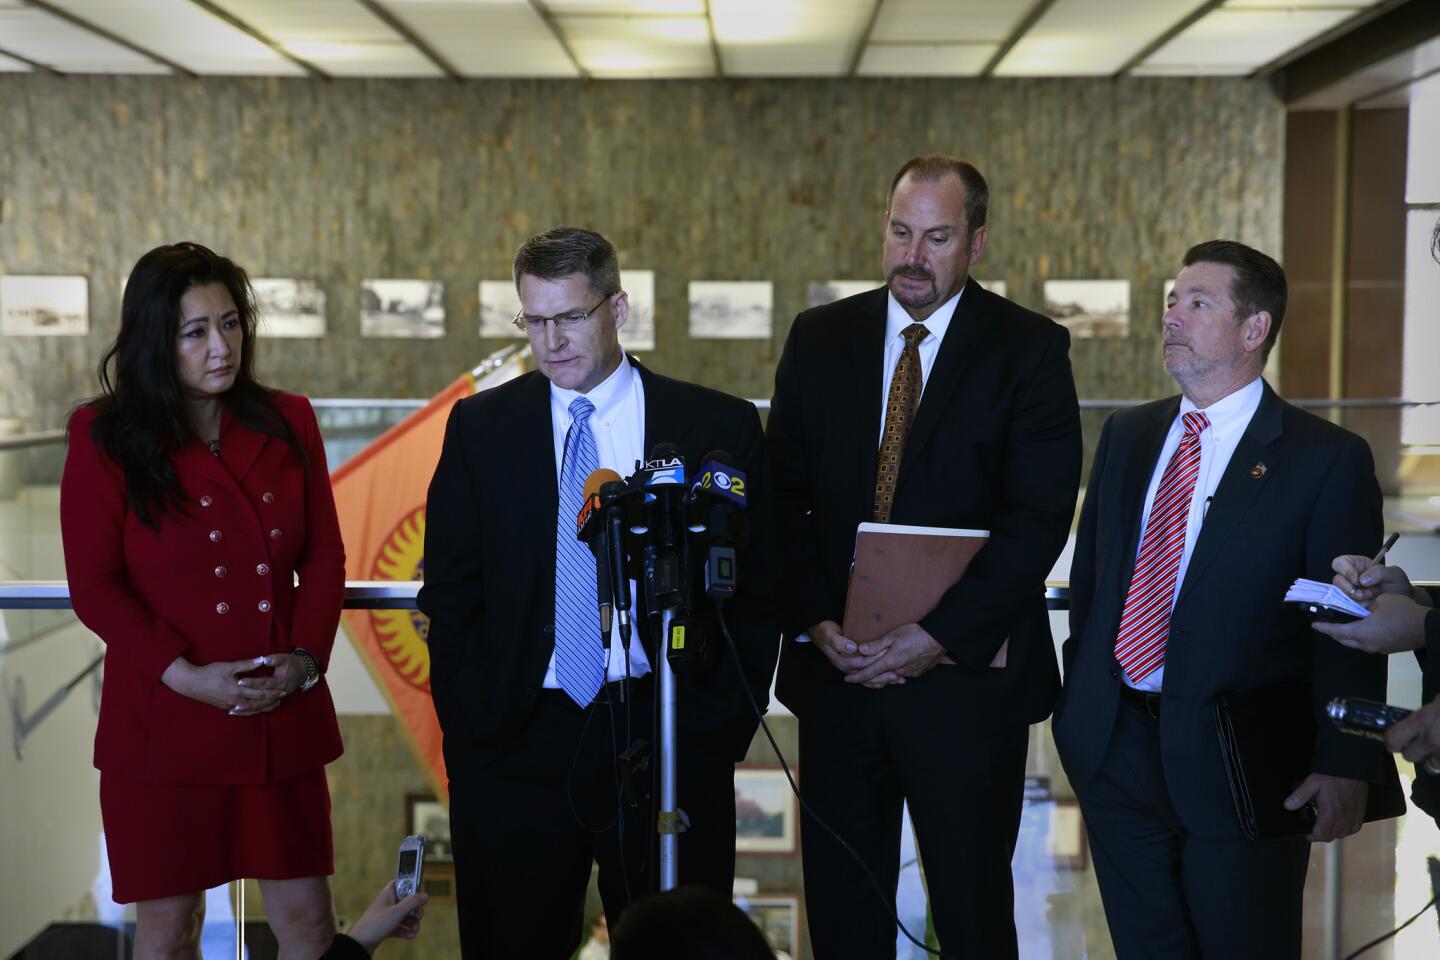 Orange County district attorney Chief of Staff Susan Kang Schroeder, left, Assistant Dist. Atty. Dan Wagner, Senior Deputy Dist. Atty. Scott Simmons and Deputy Dist. Atty. Howard Gundy speak to the media after Judge Thomas Goethals removed their office from the case against Scott Dekraai.